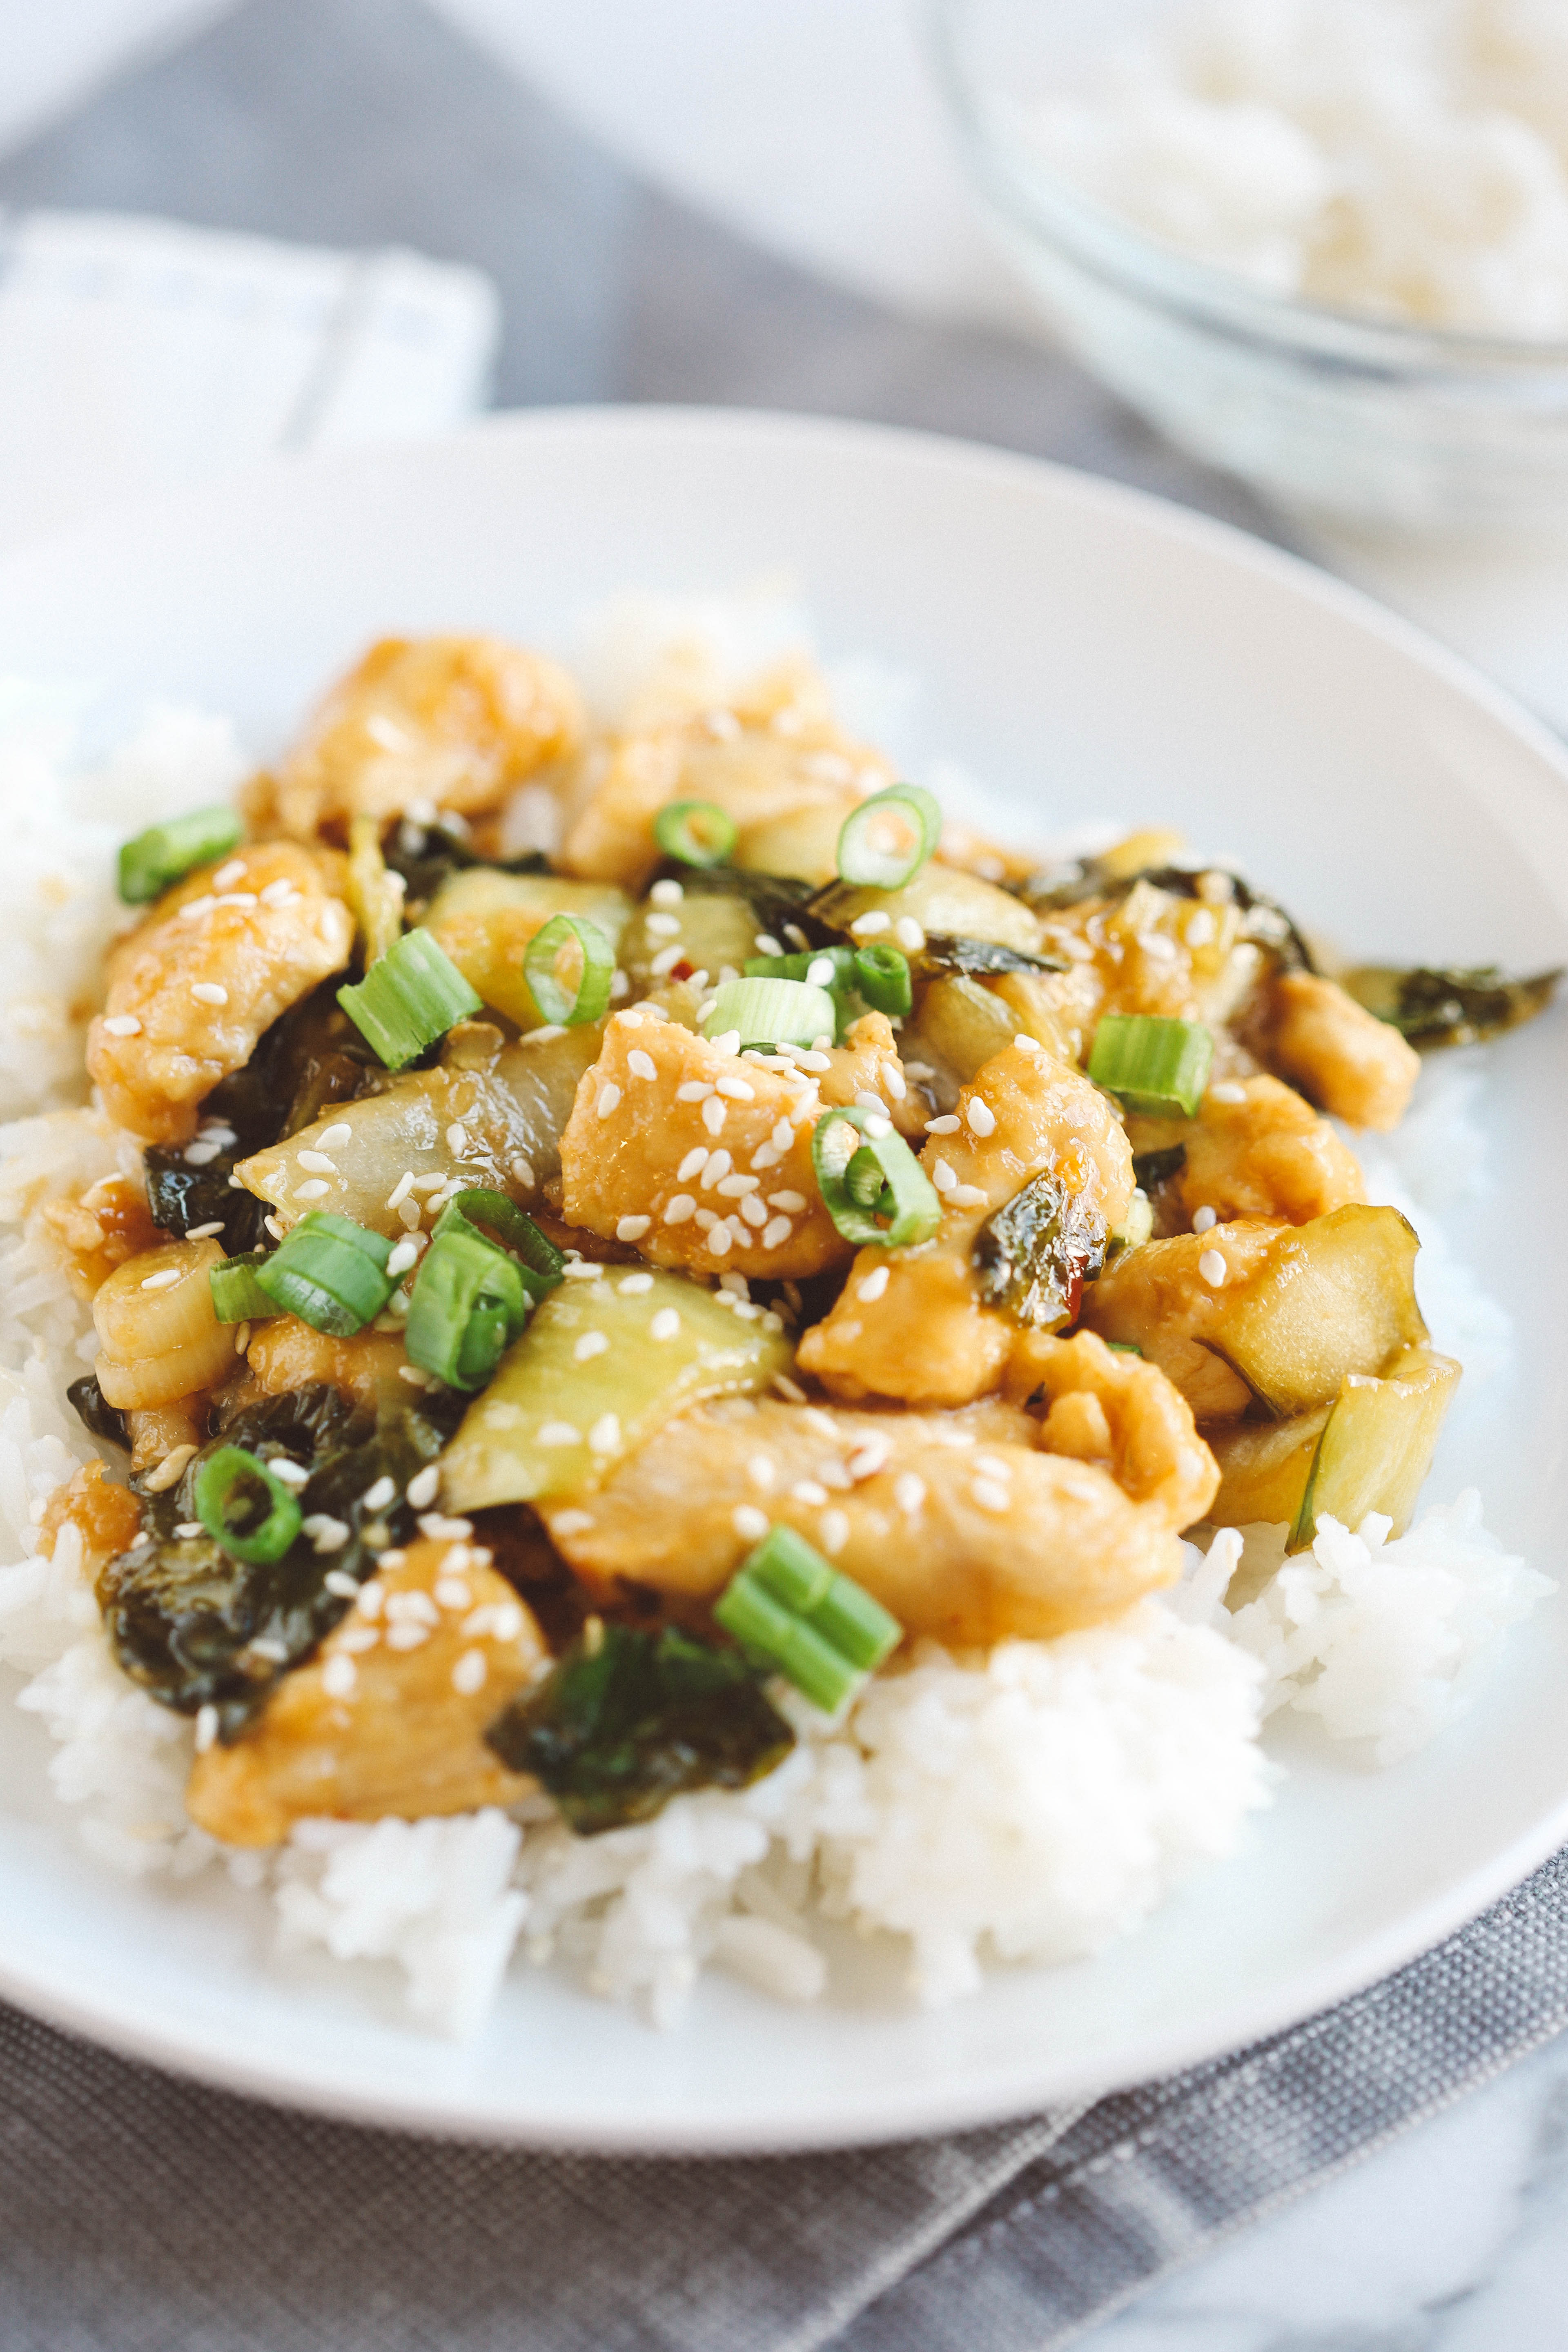 Skip the take-out and make this EASY Sesame Chicken! The perfect weeknight comfort meal made with all fresh ingredients in under 30 minutes!